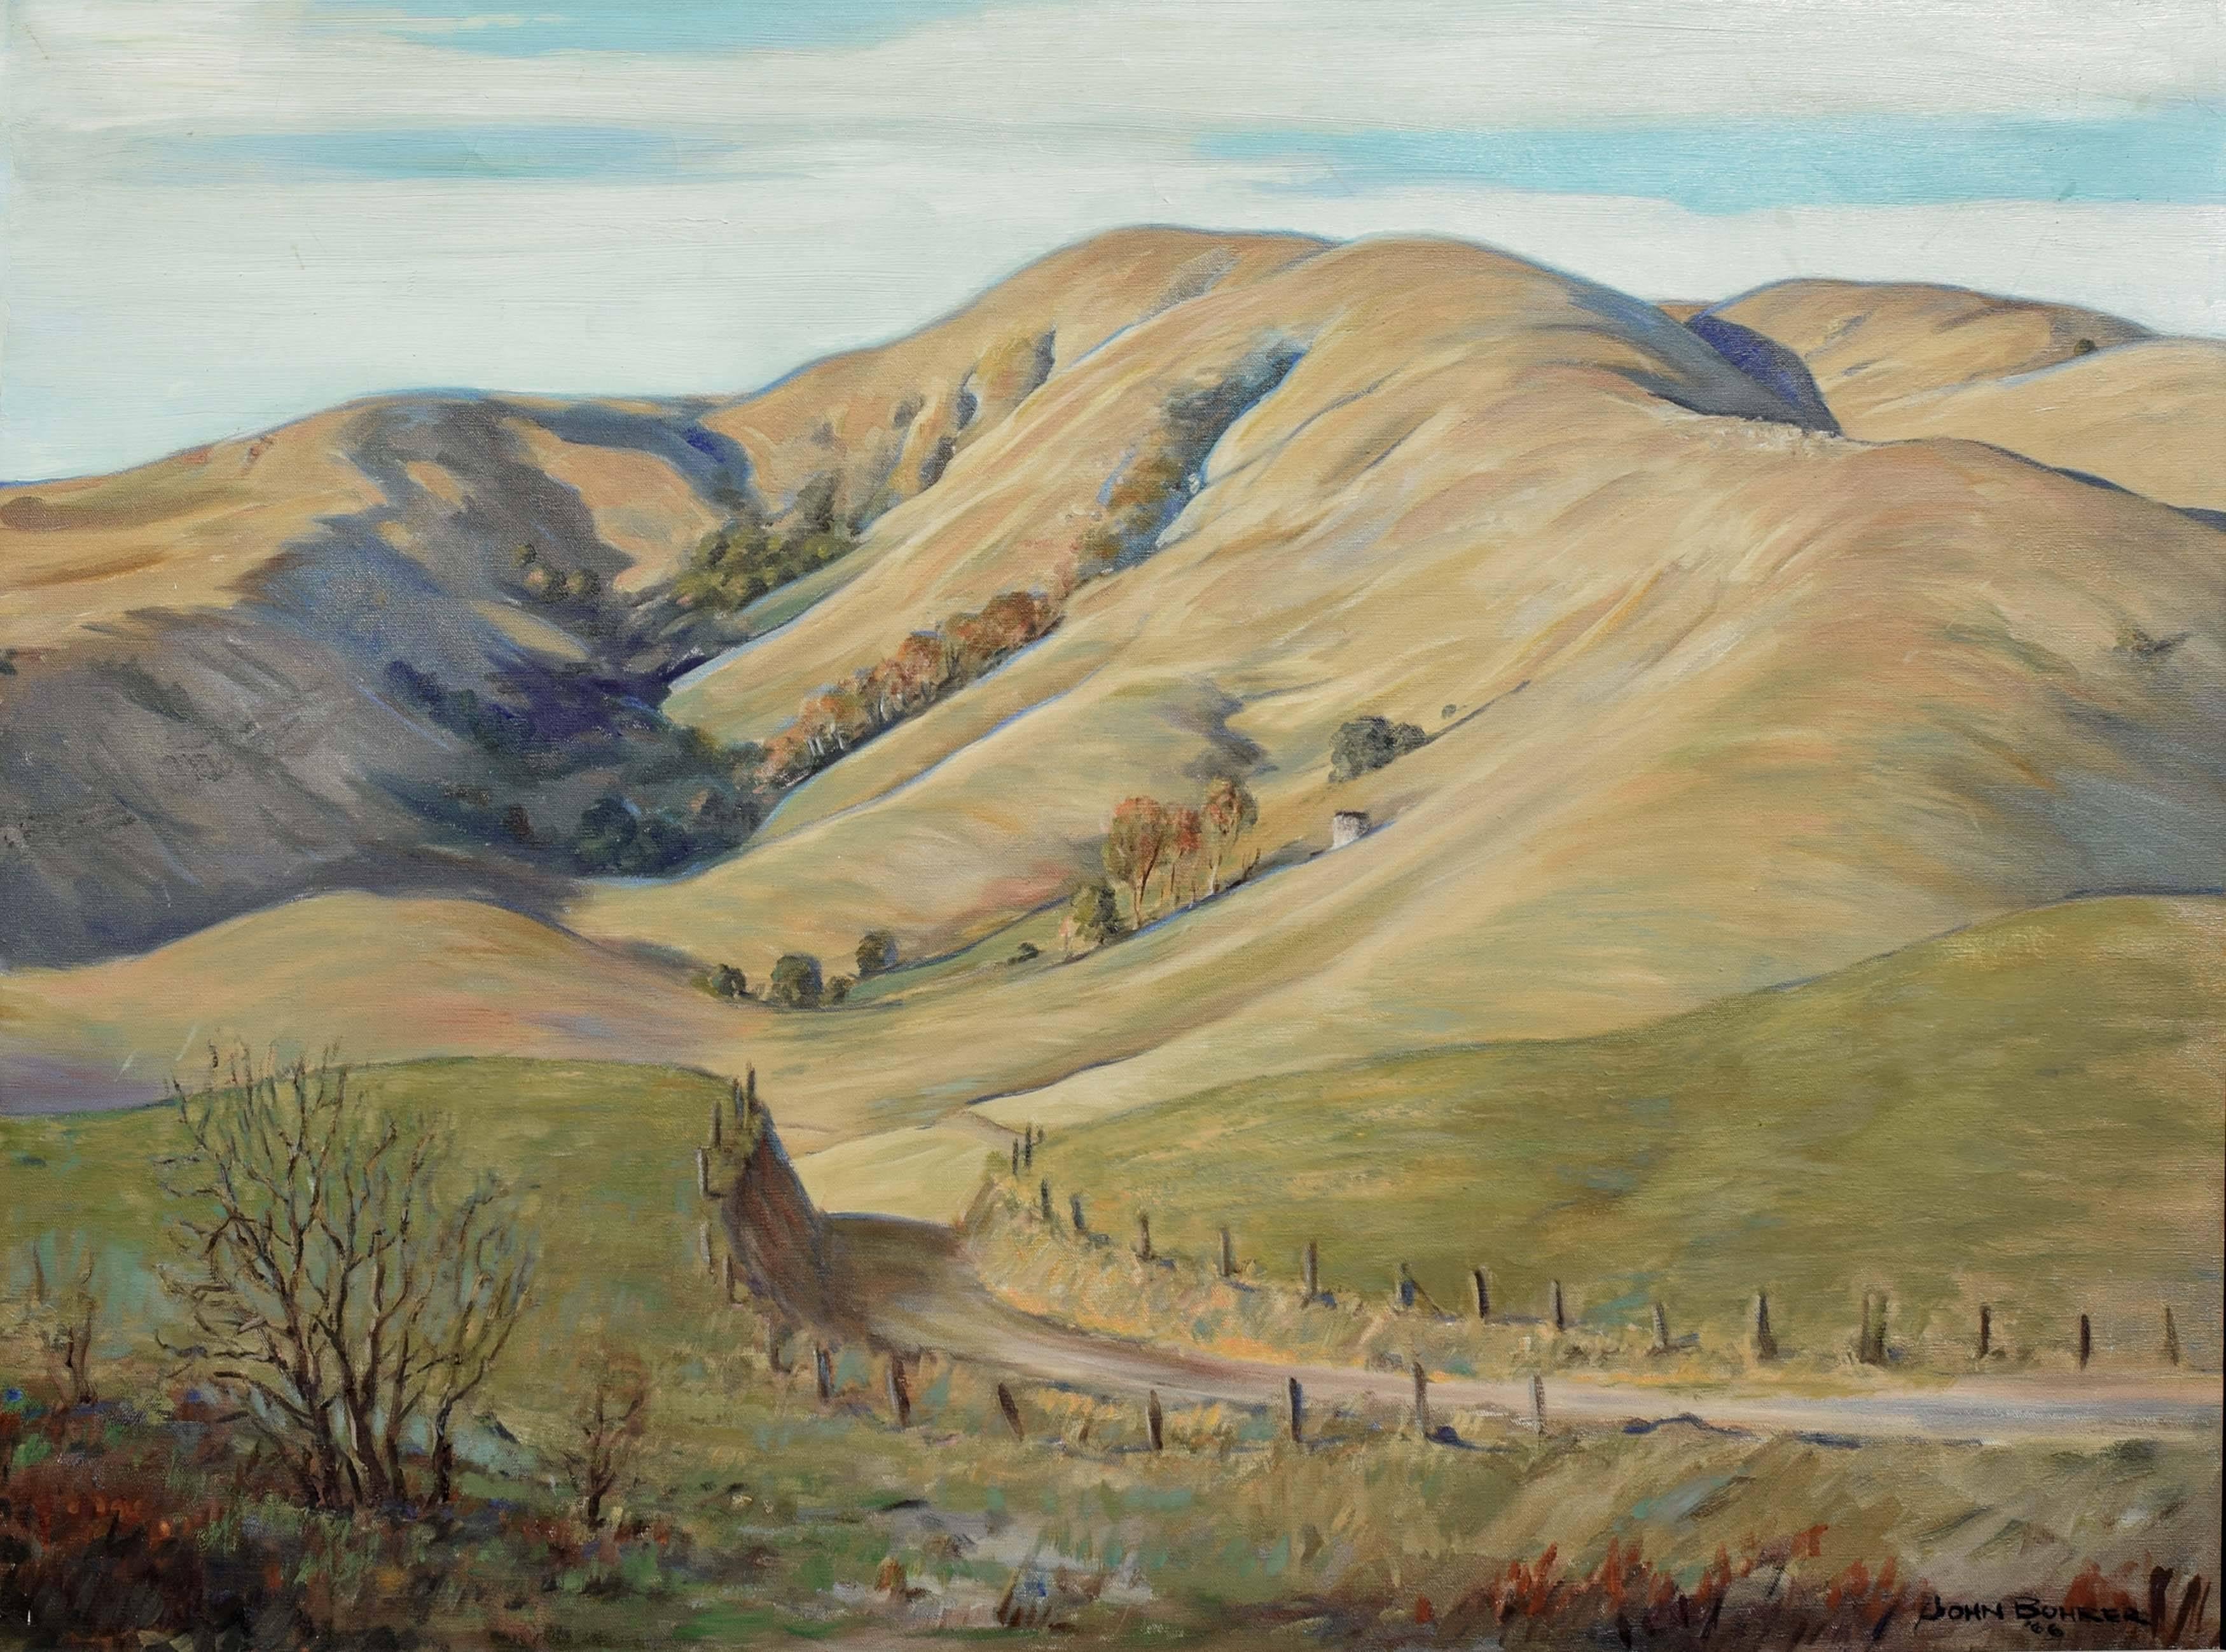 California Bay Area Landscape - Painting by John Busch Bohrer